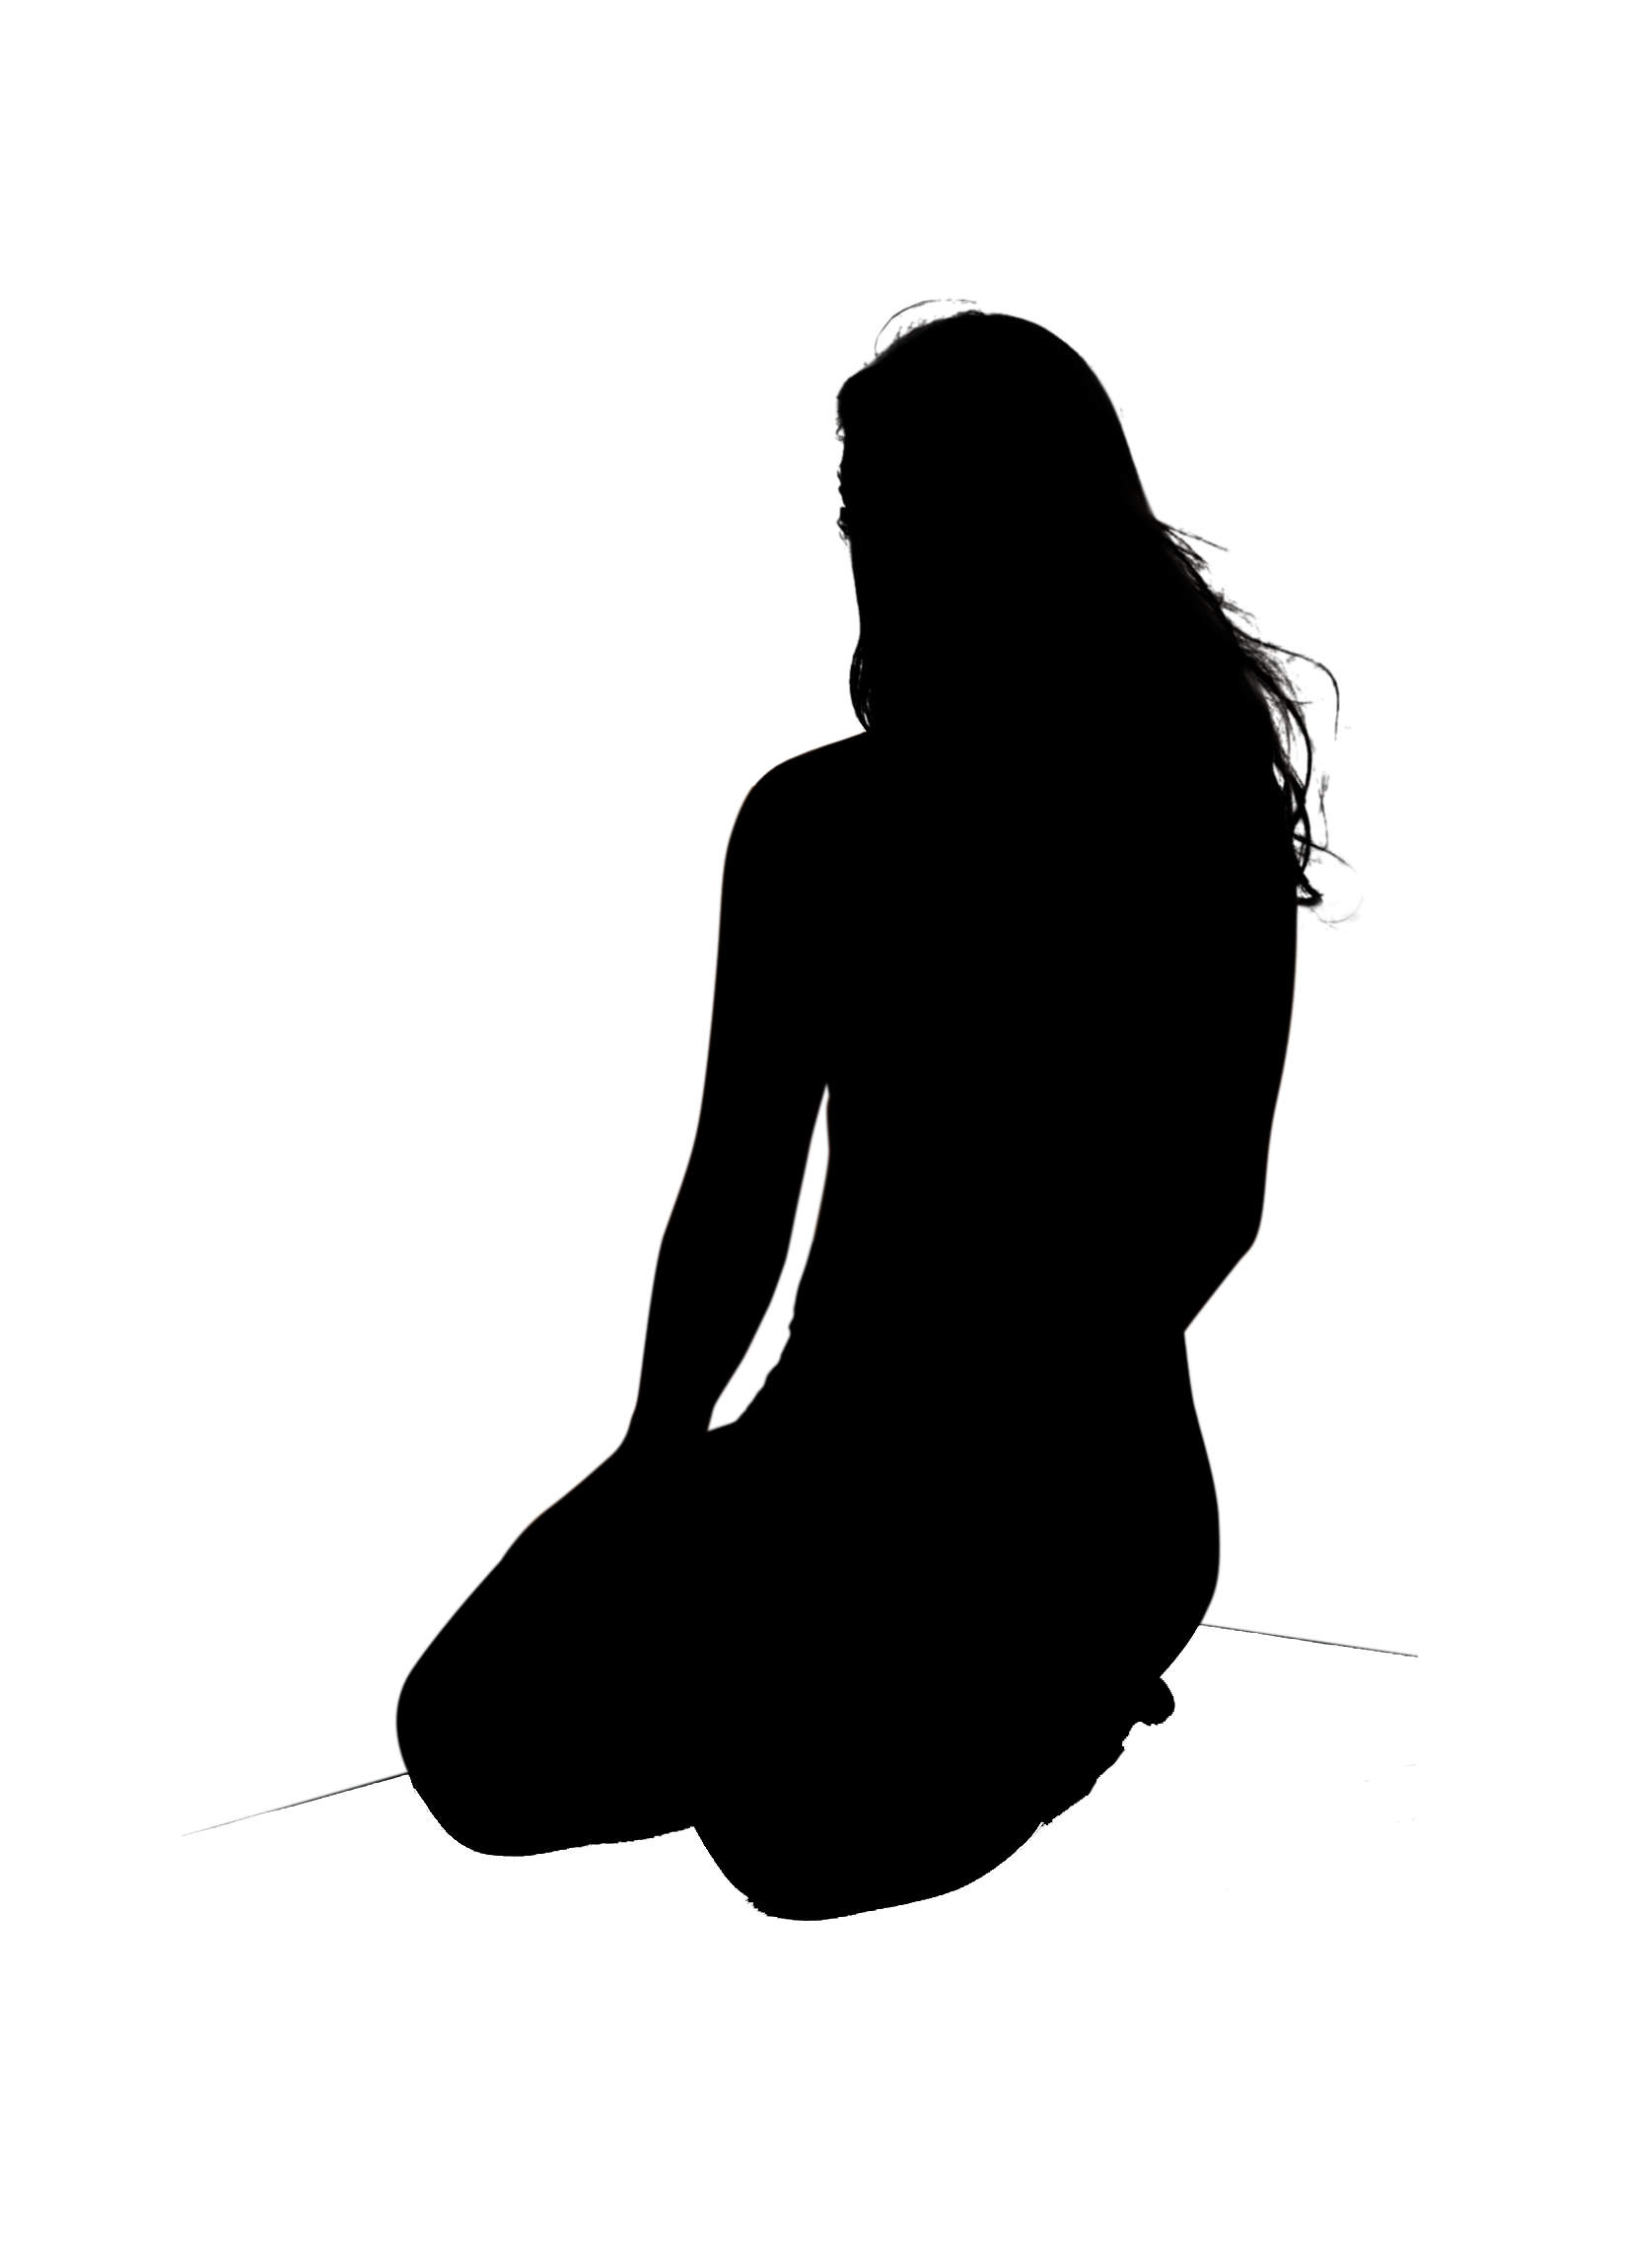 Vajrasana, Vajrasana png, Vajrasana PNG image, transparent Vajrasana png image, Vajrasana png full hd images download